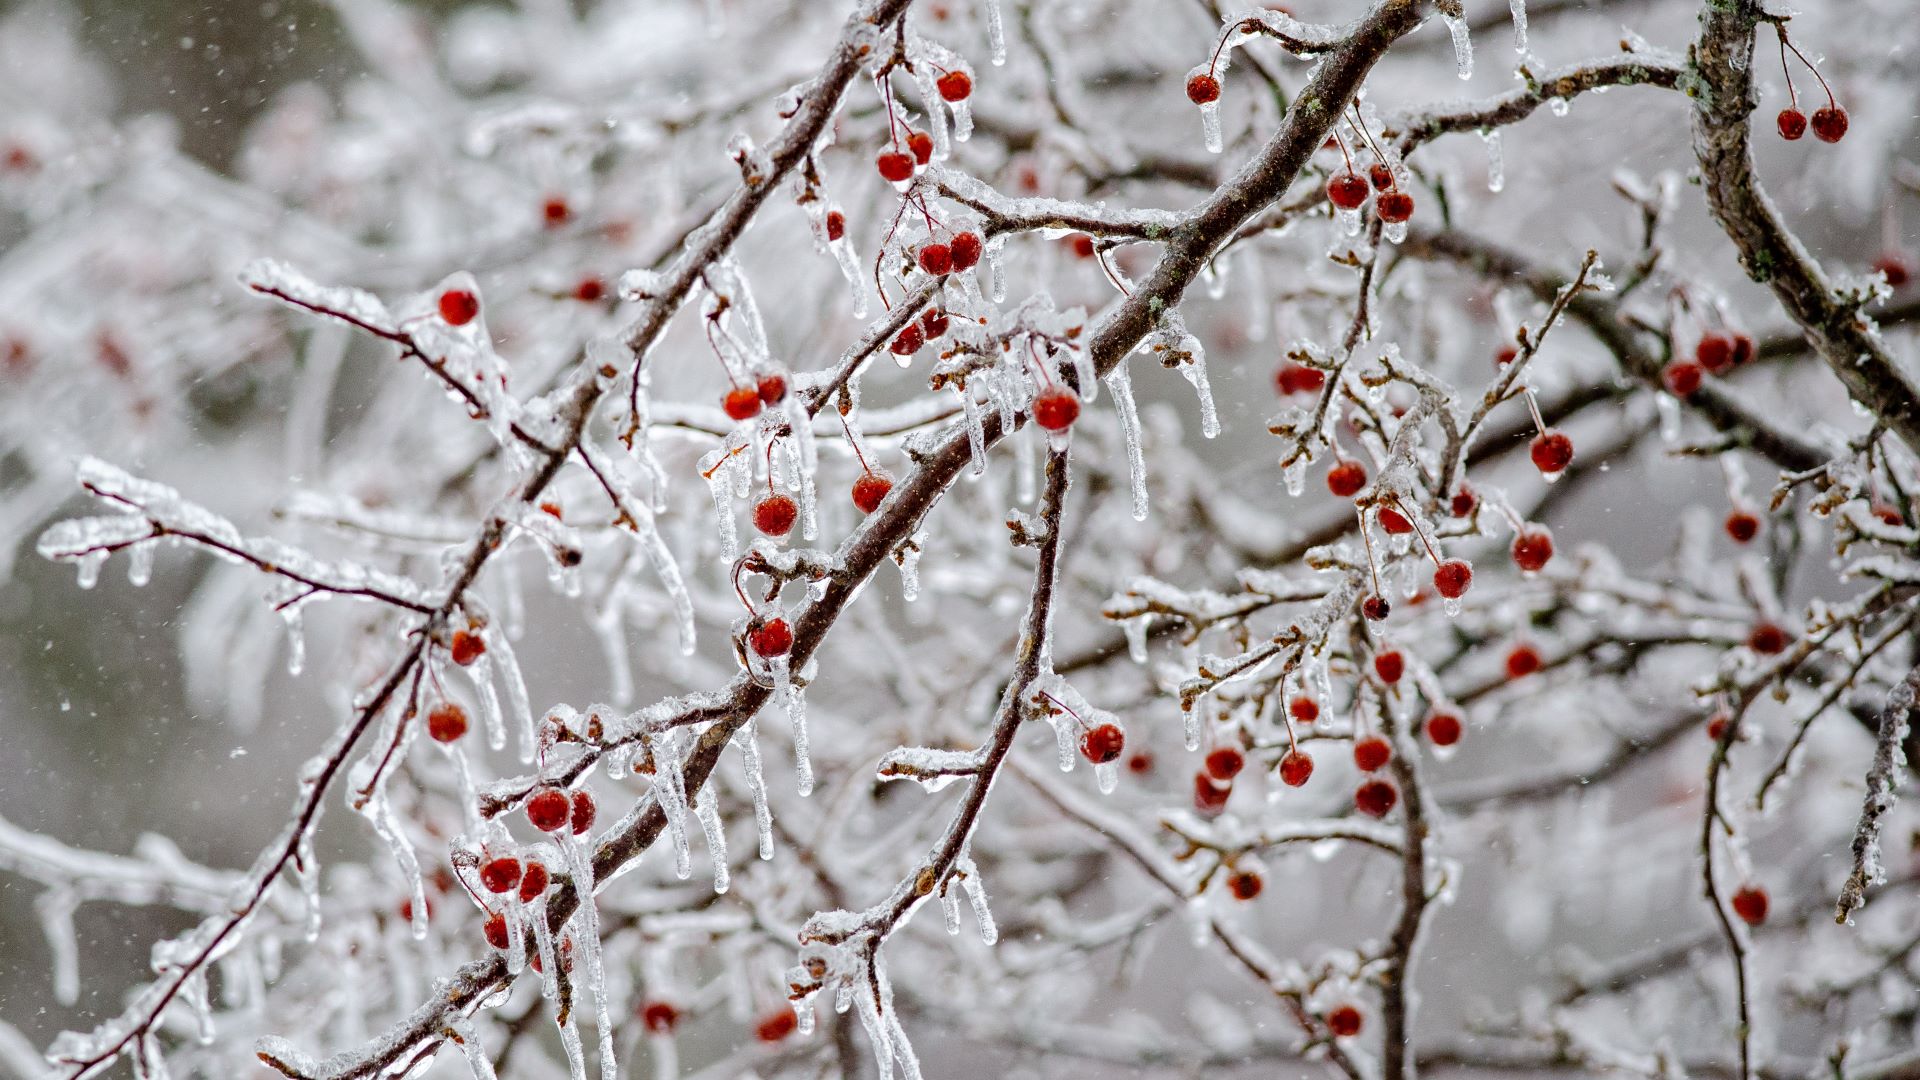 Use these free DNR photo scenes to 'Zoom' into a winter wonderland -  